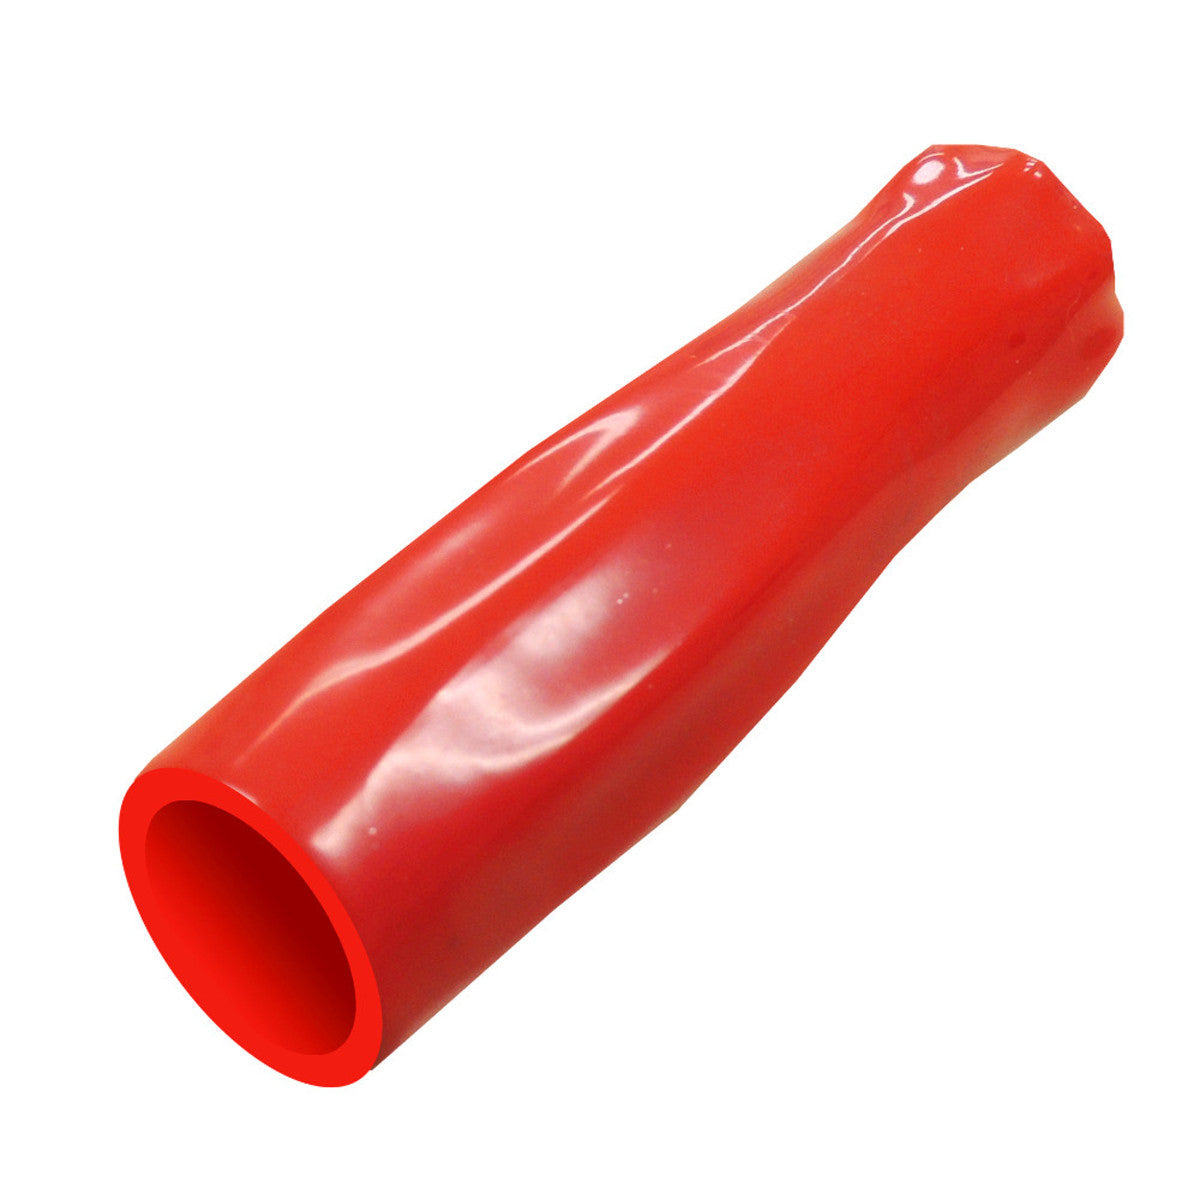 Unger Replacement Broom Handle Grip Red